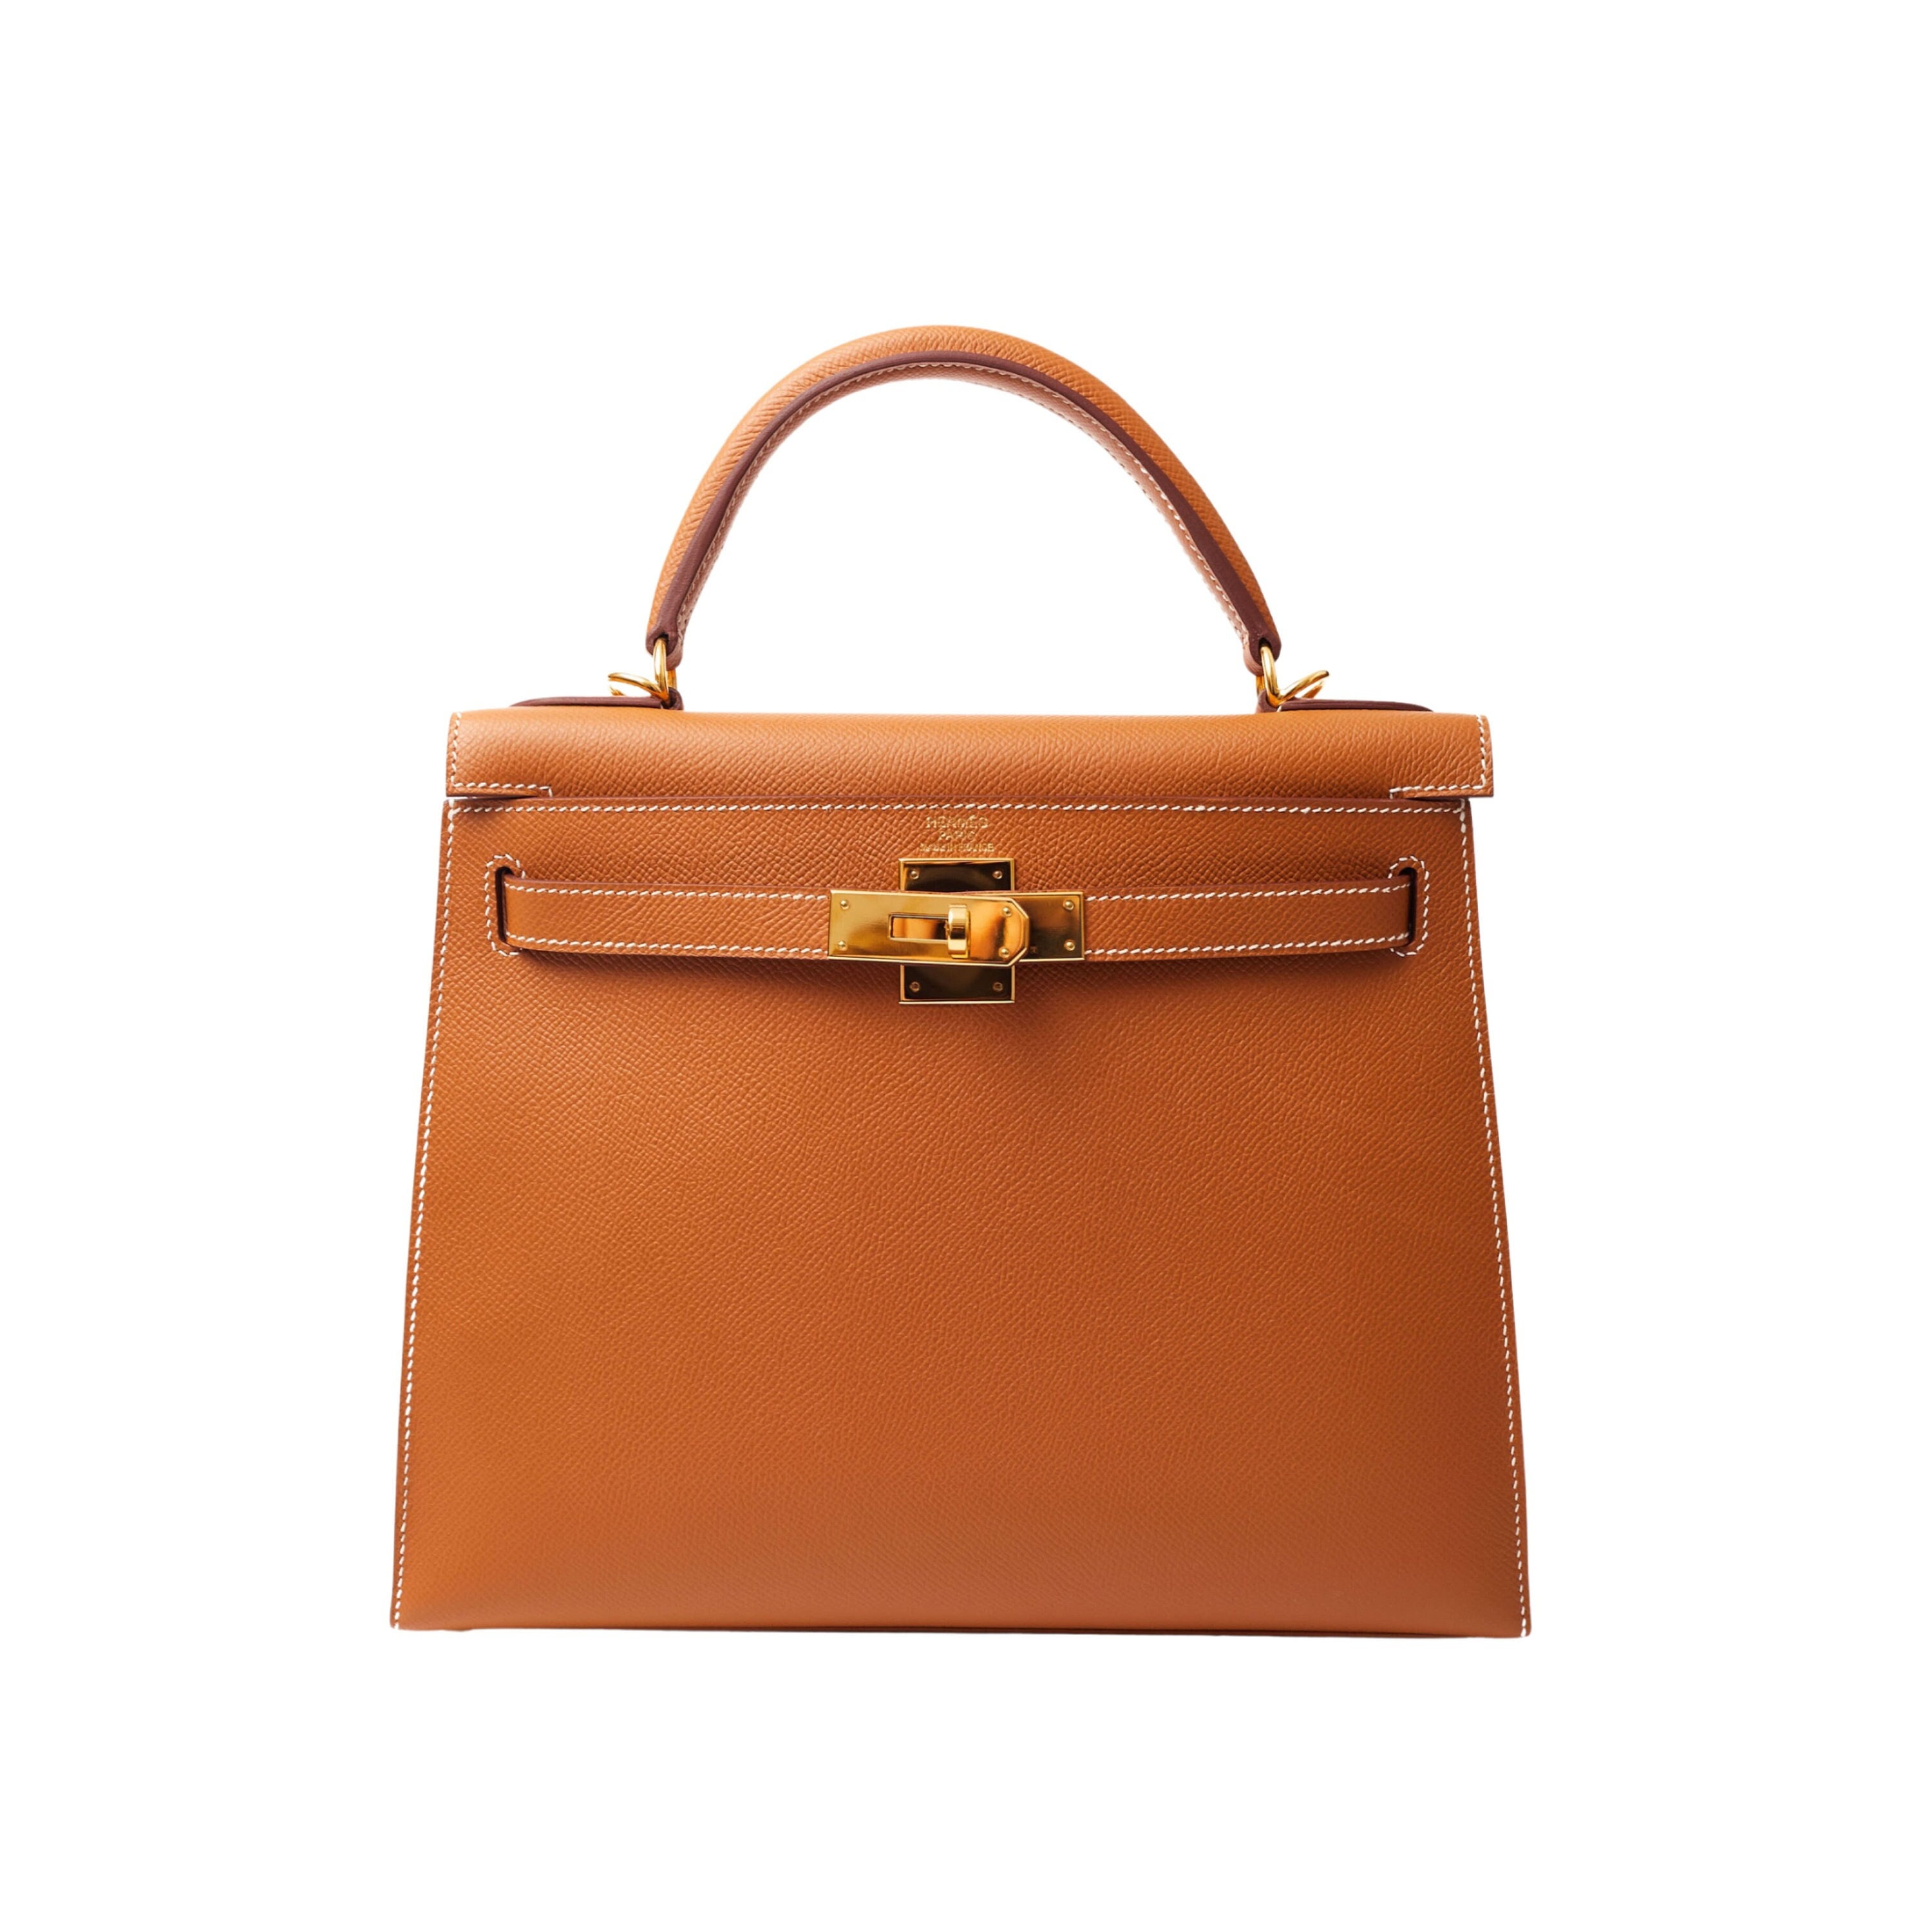 SLFMag — Hermes Kelly bag with matching strap featuring a